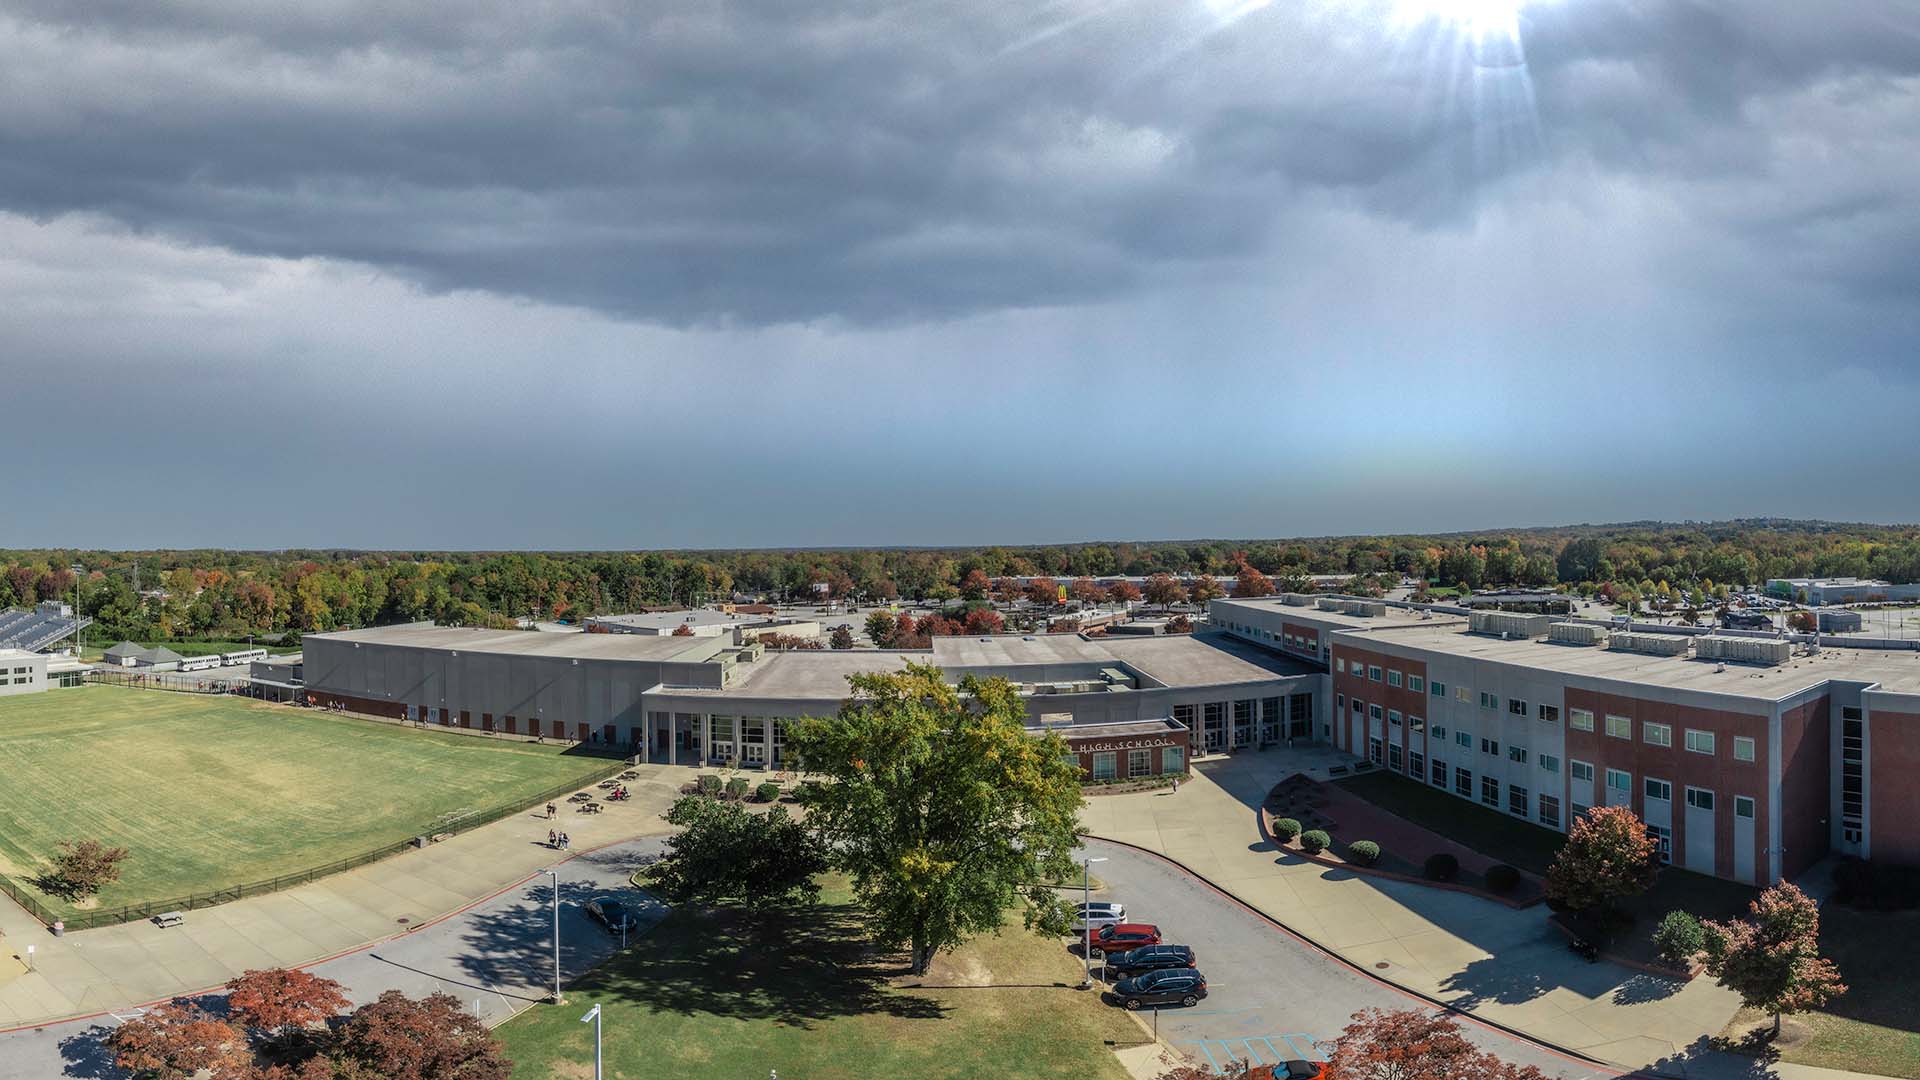 Drone image of the Wade Hampton High campus